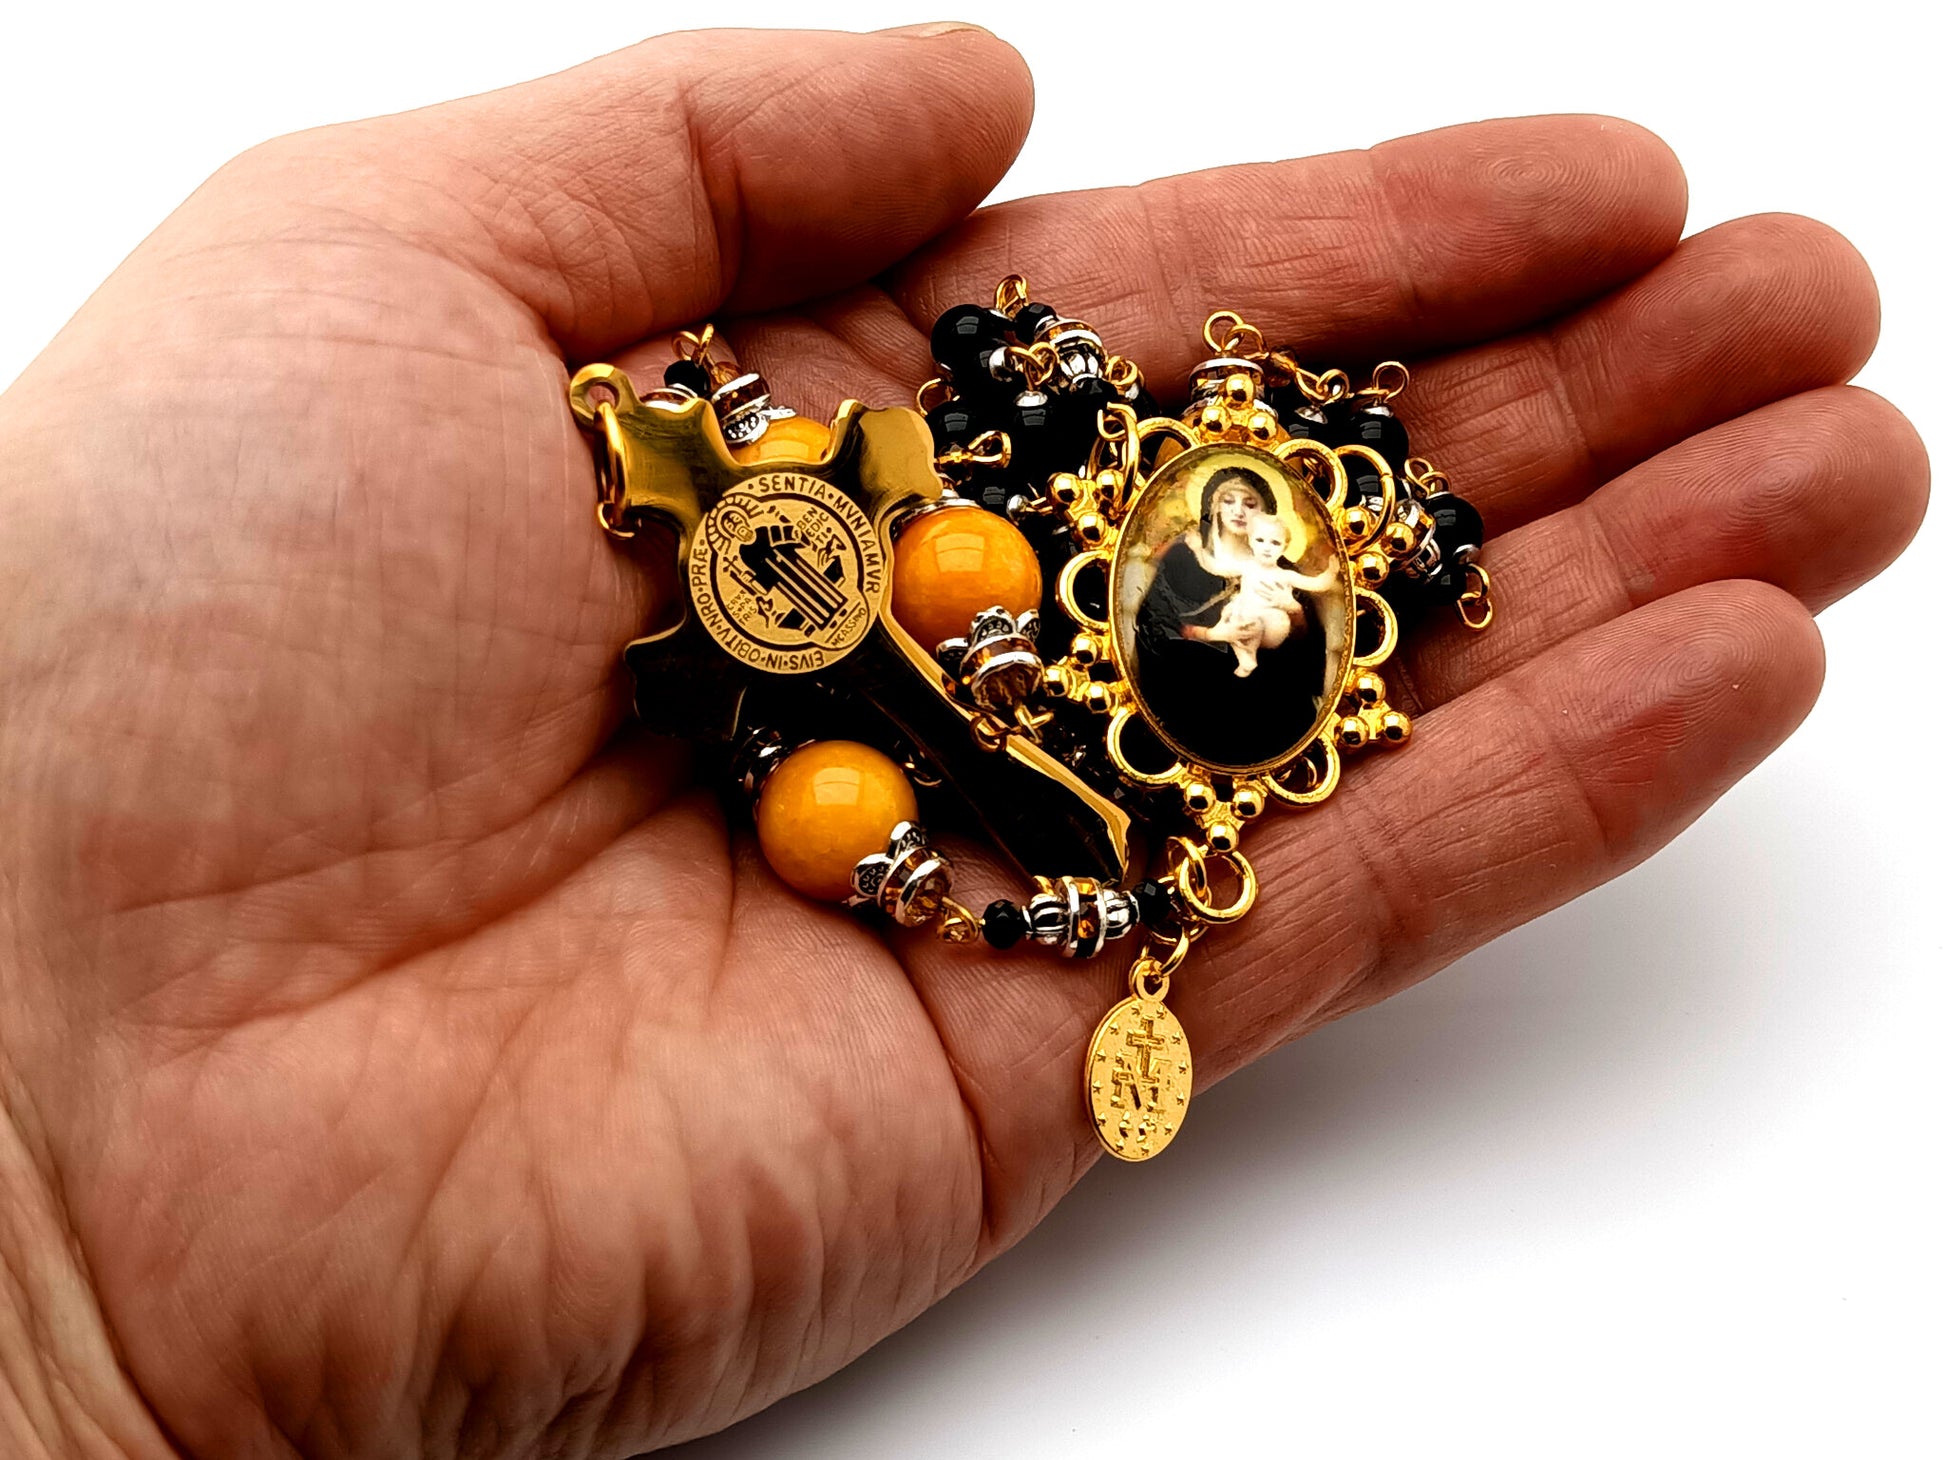 Madonna and Child Jesus unique rosary beads with onyx and jade gemstone beads and Saint Benedict gold plated black enamel stainless steel crucifix.